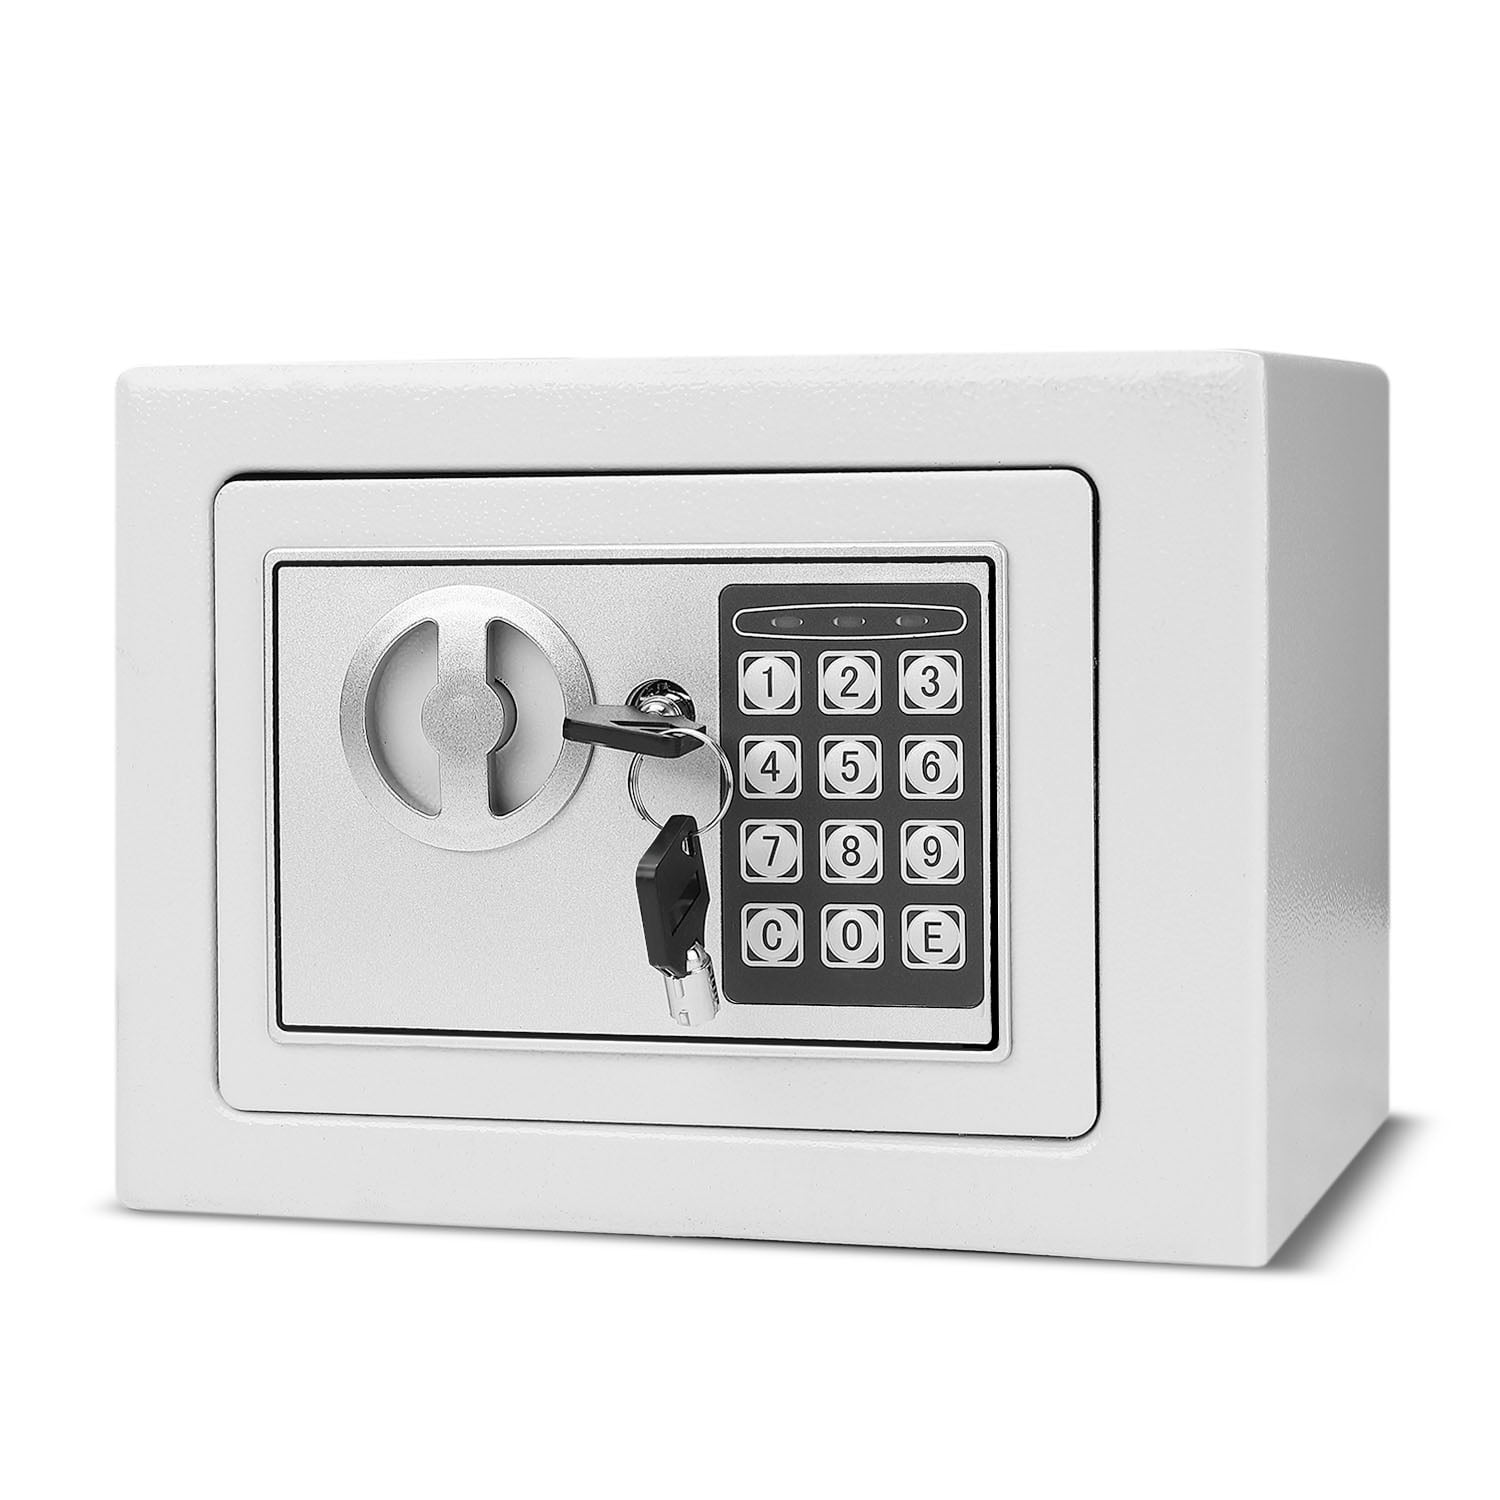 Fire Proof Electronic Wall Safe Lock Hidden Cash Jewelry Small Guns Key Security